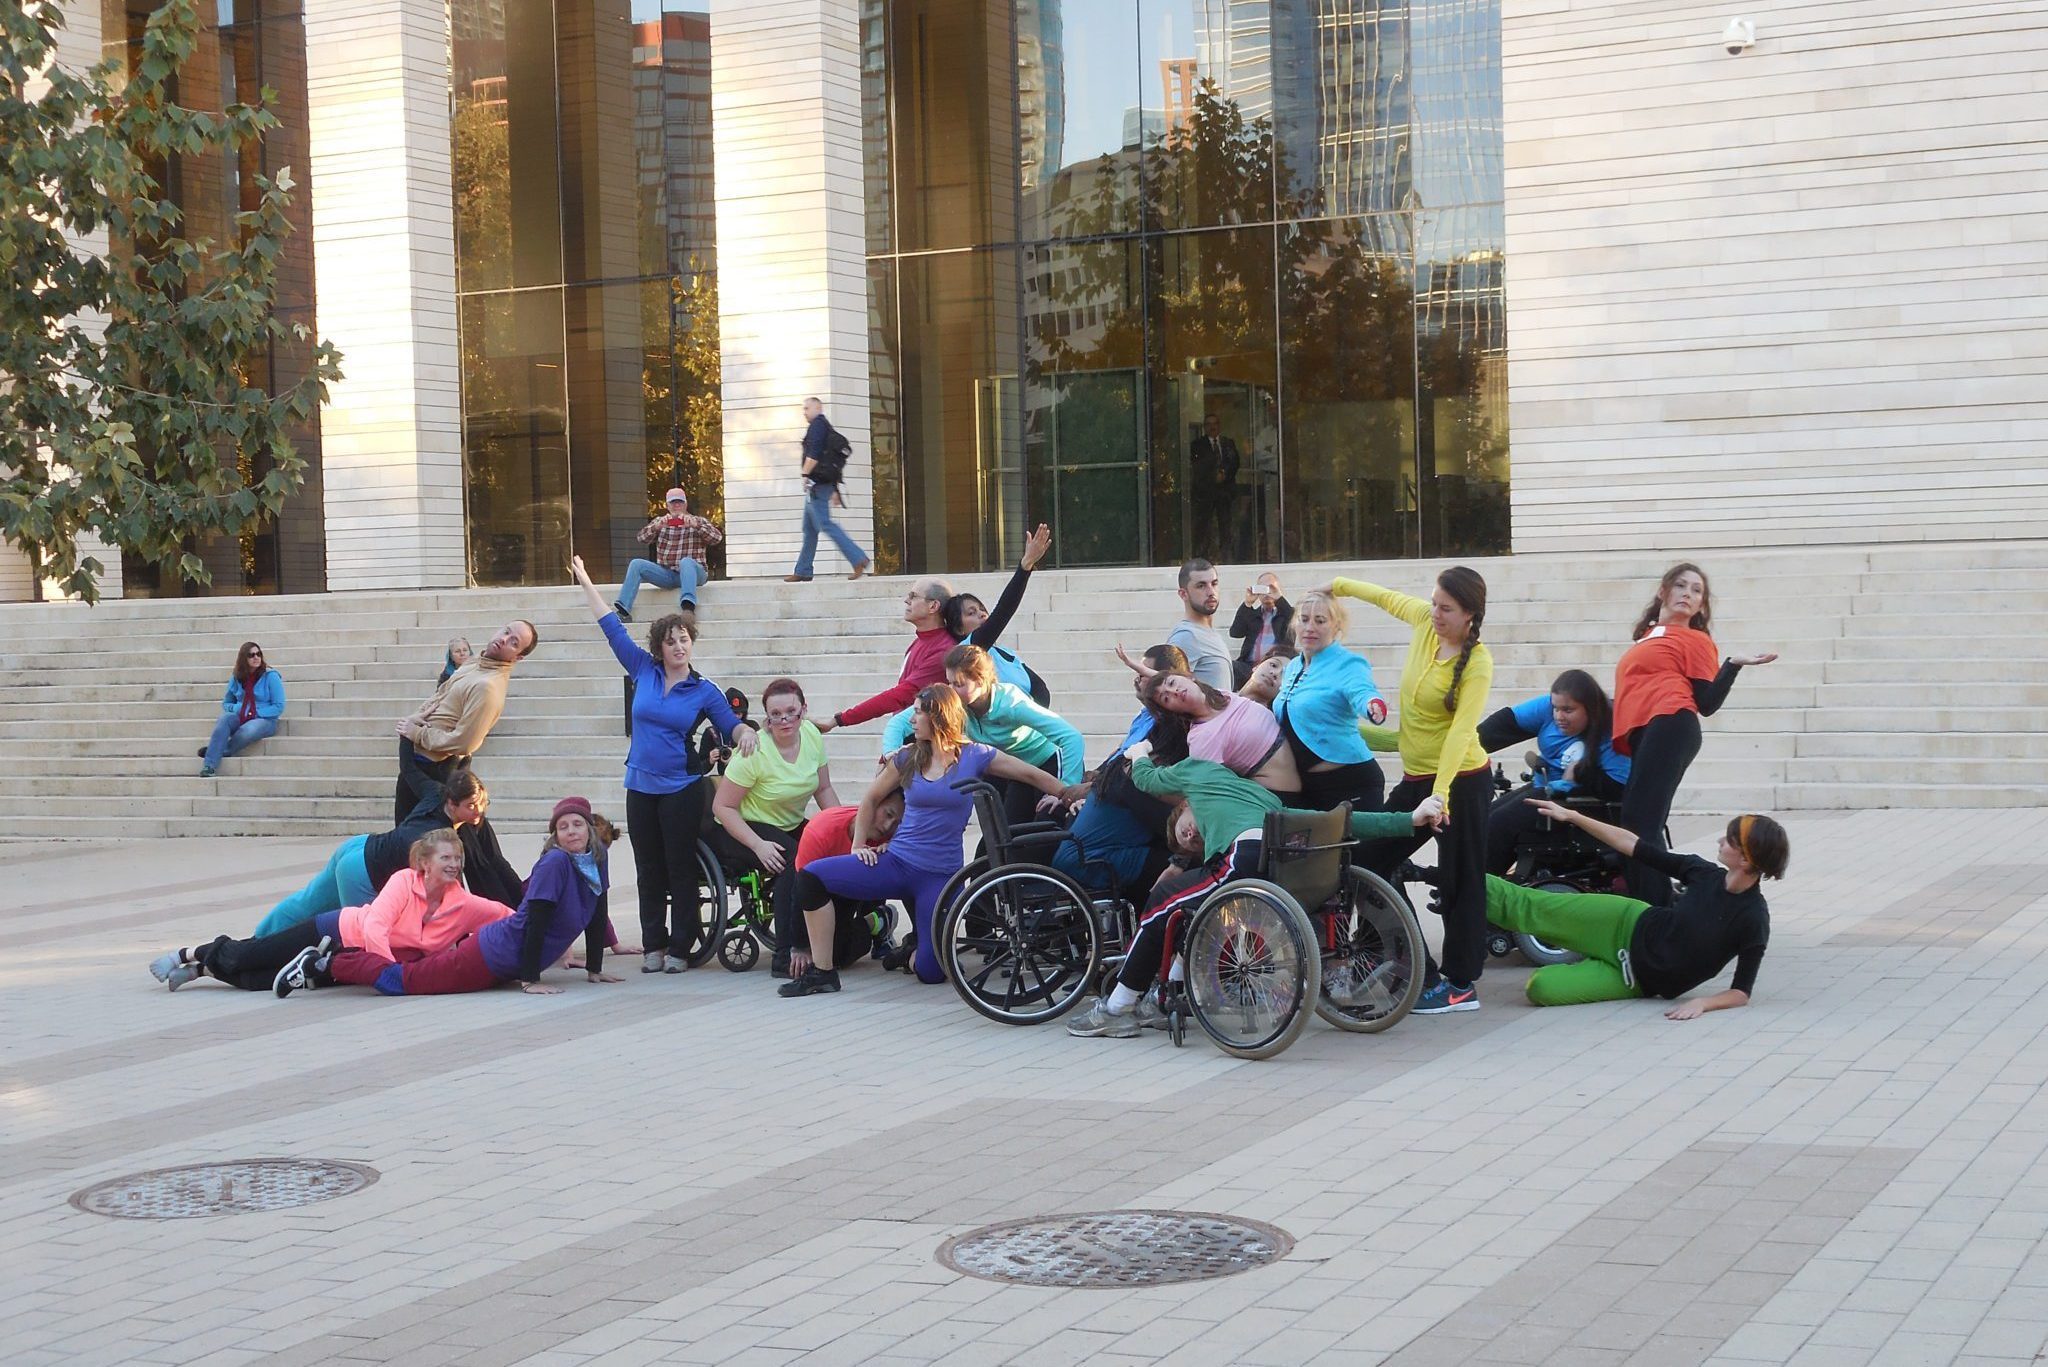 A group of dancers with and without disabilities perform outside in front of a large building. The dancers are in various poses and wearing brightly colored clothing.